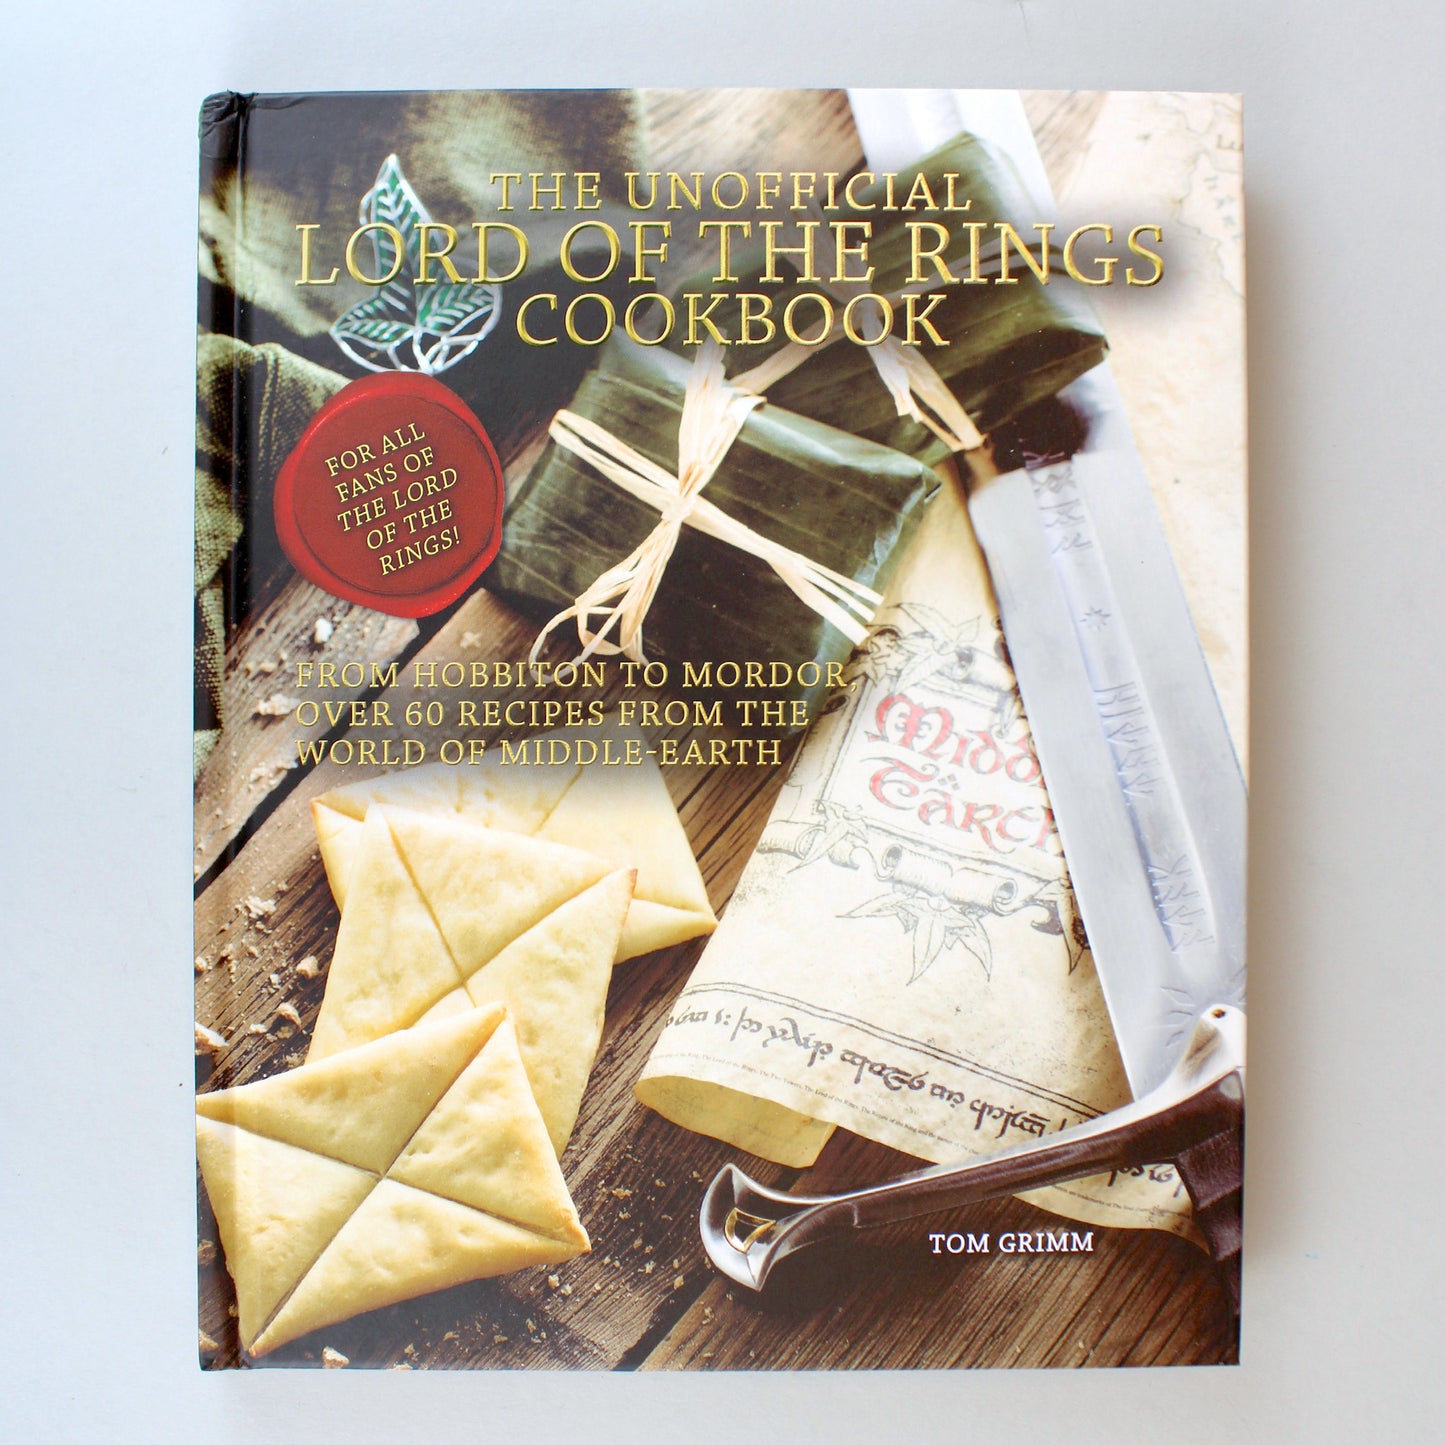 The Unofficial Lord of the Rings Cookbook (Hardcover)